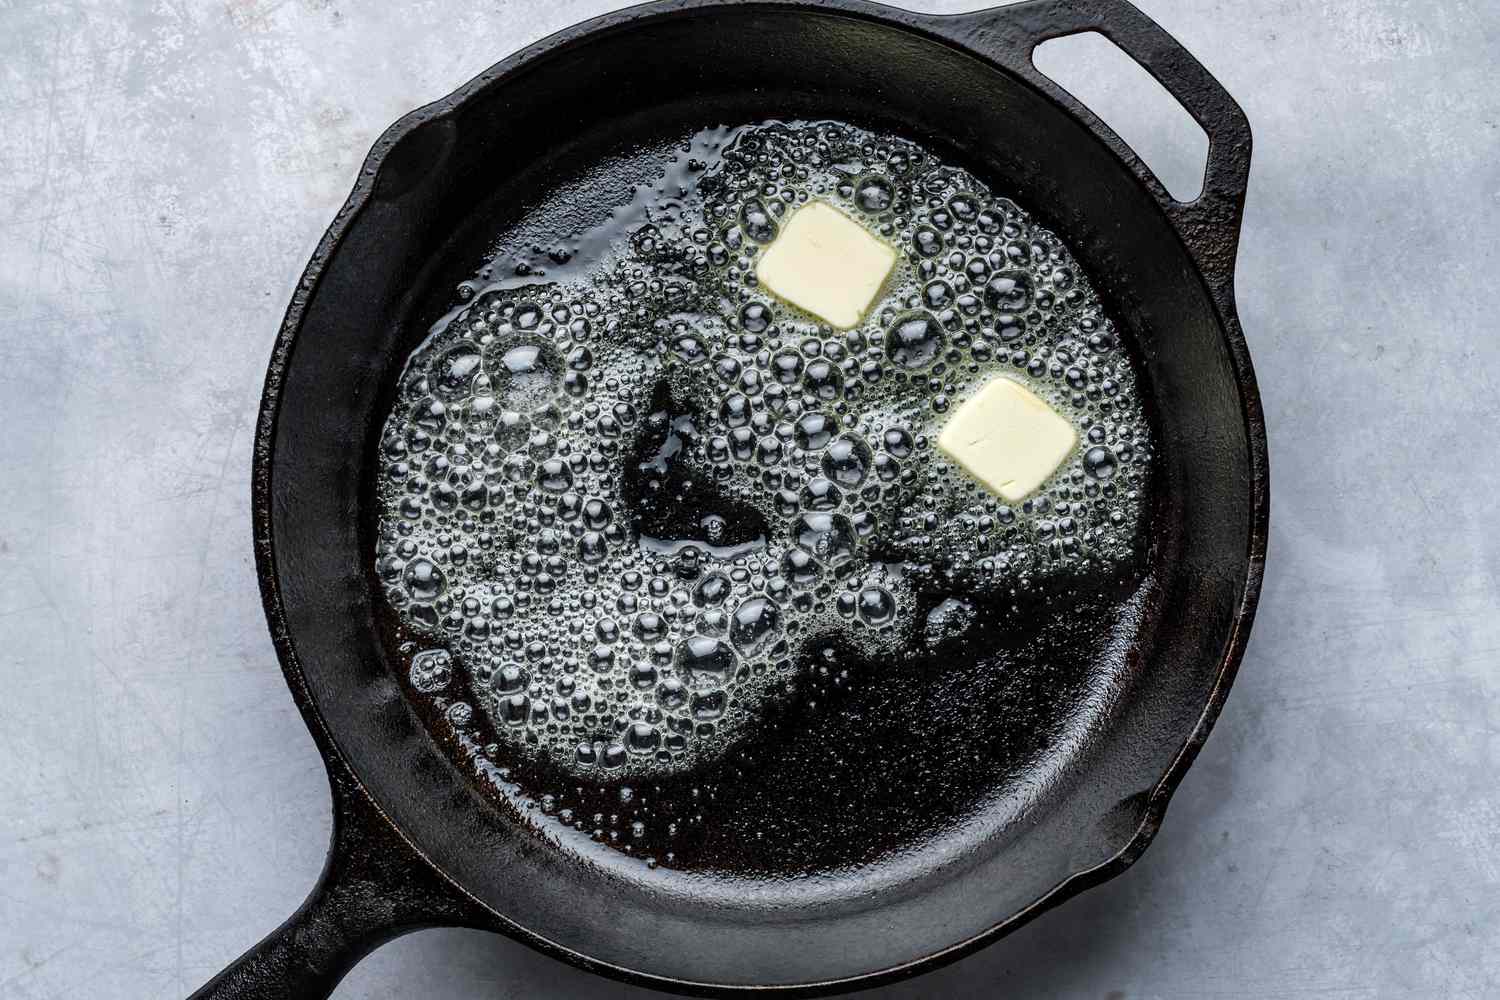 Two pieces of butter melting in a hot skillet